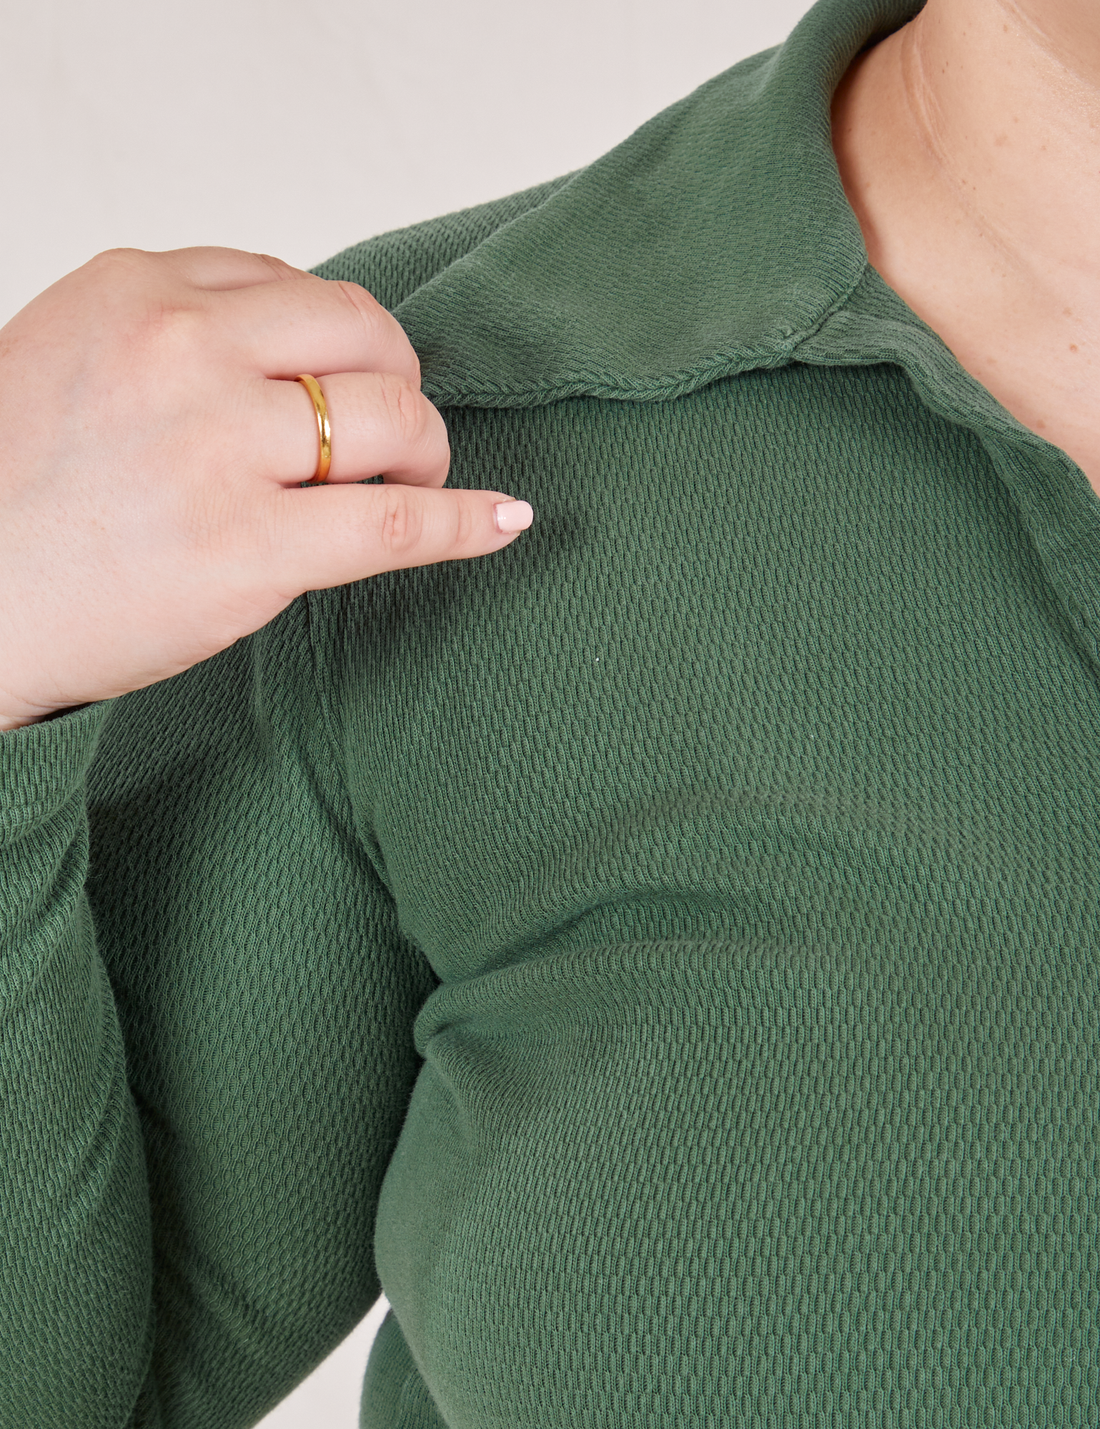 Long Sleeve Fisherman Polo in Dark Emerald Green front close up on Ashley